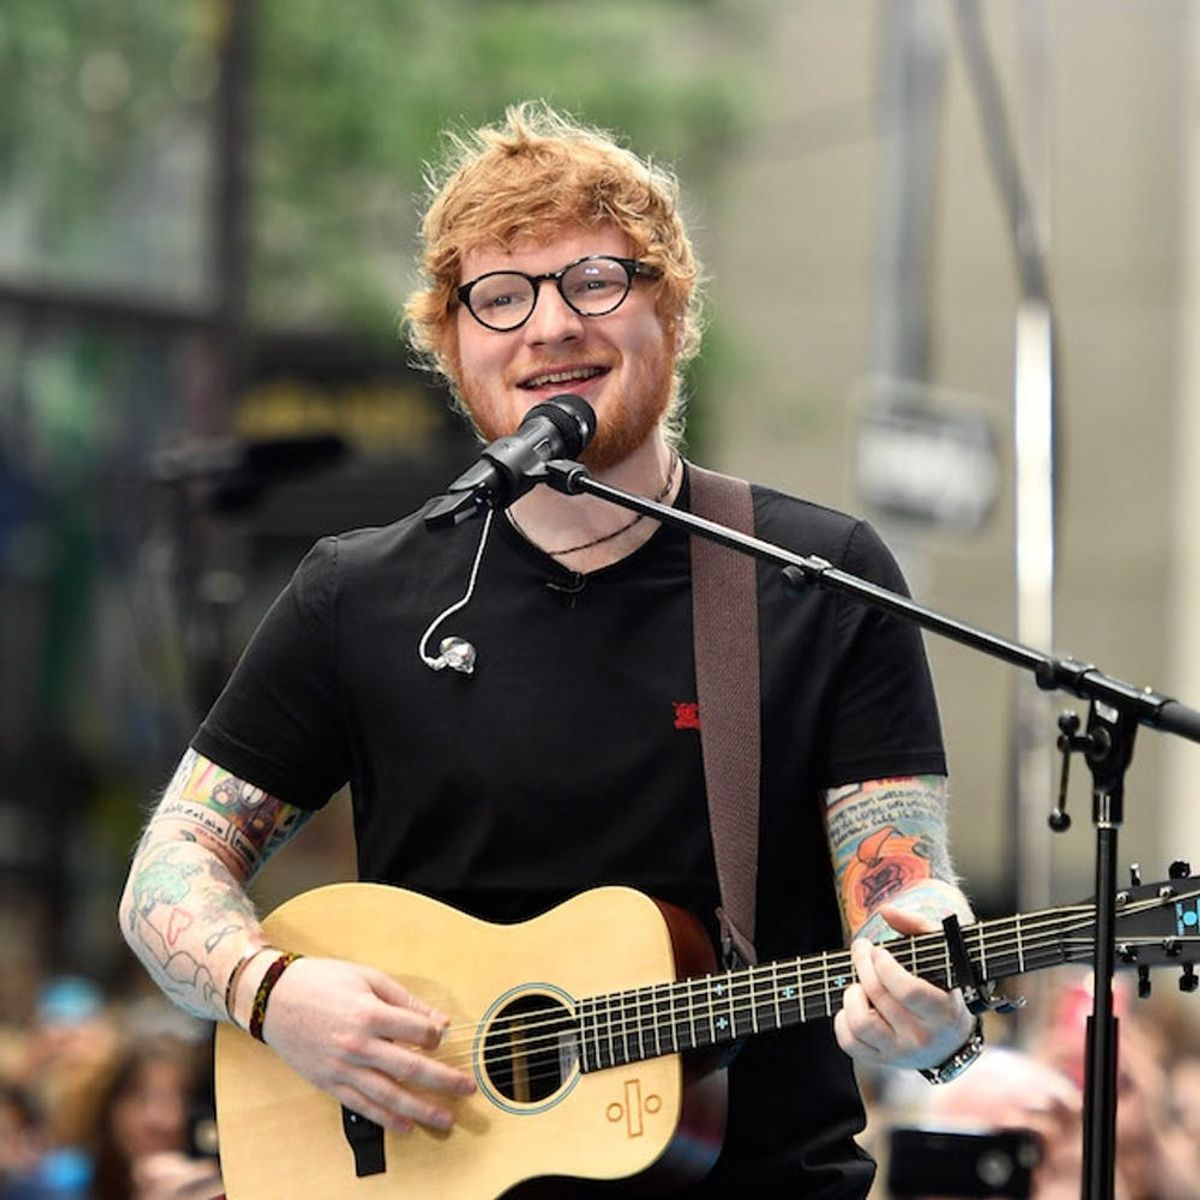 Morning Buzz! Ed Sheeran’s Game of Thrones Cameo Made People Go Nuts + More